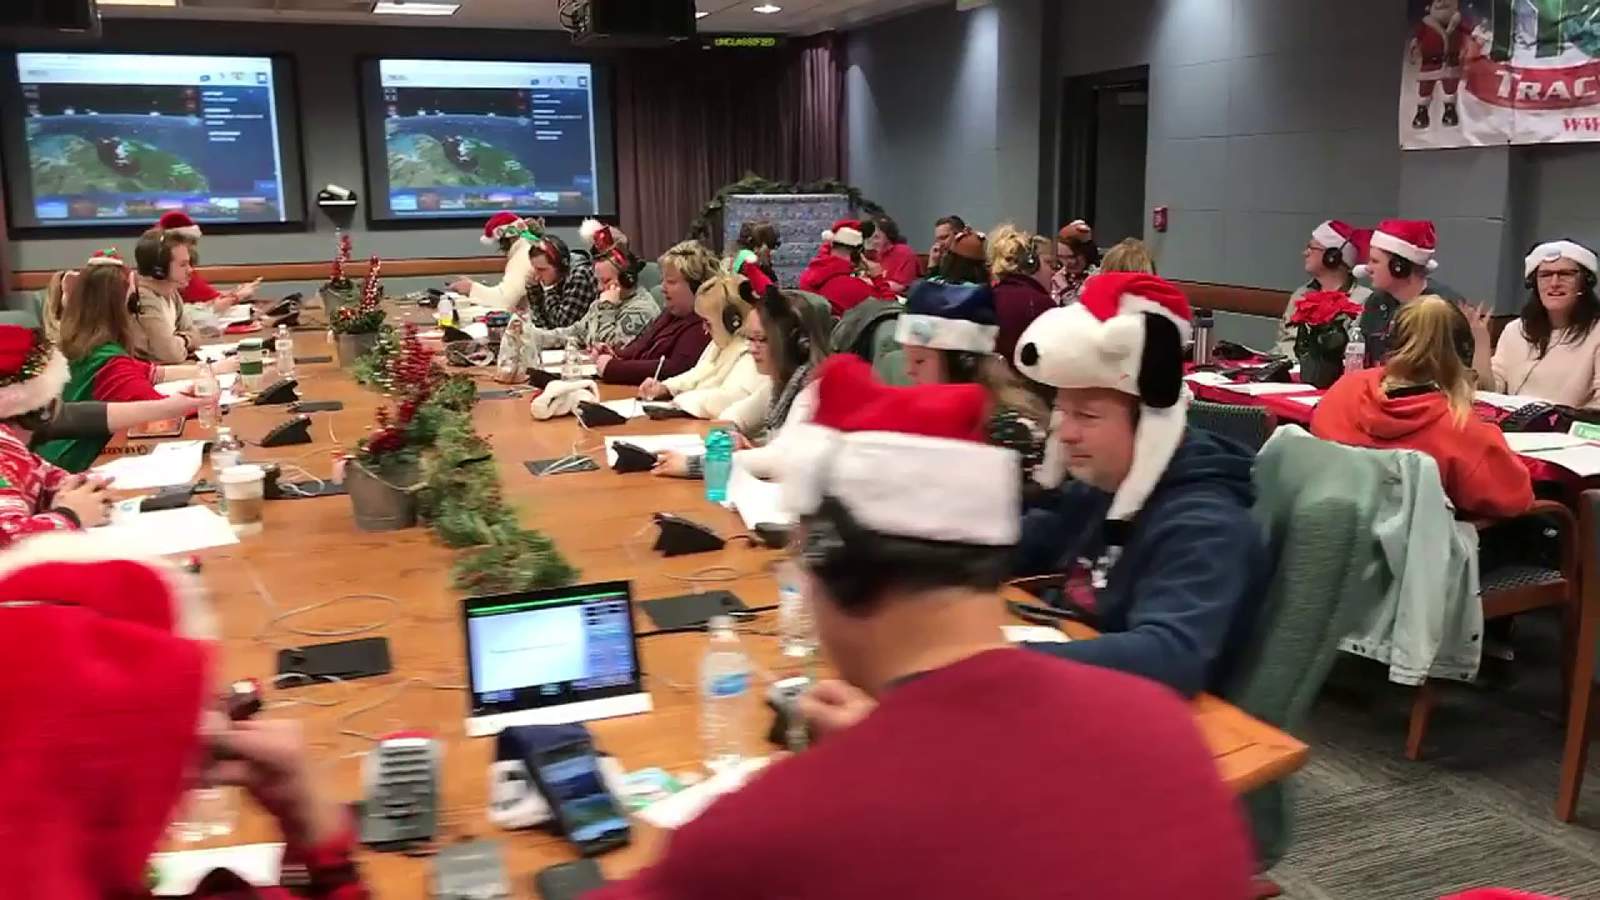 It takes a tech village to track Santa on Christmas Eve